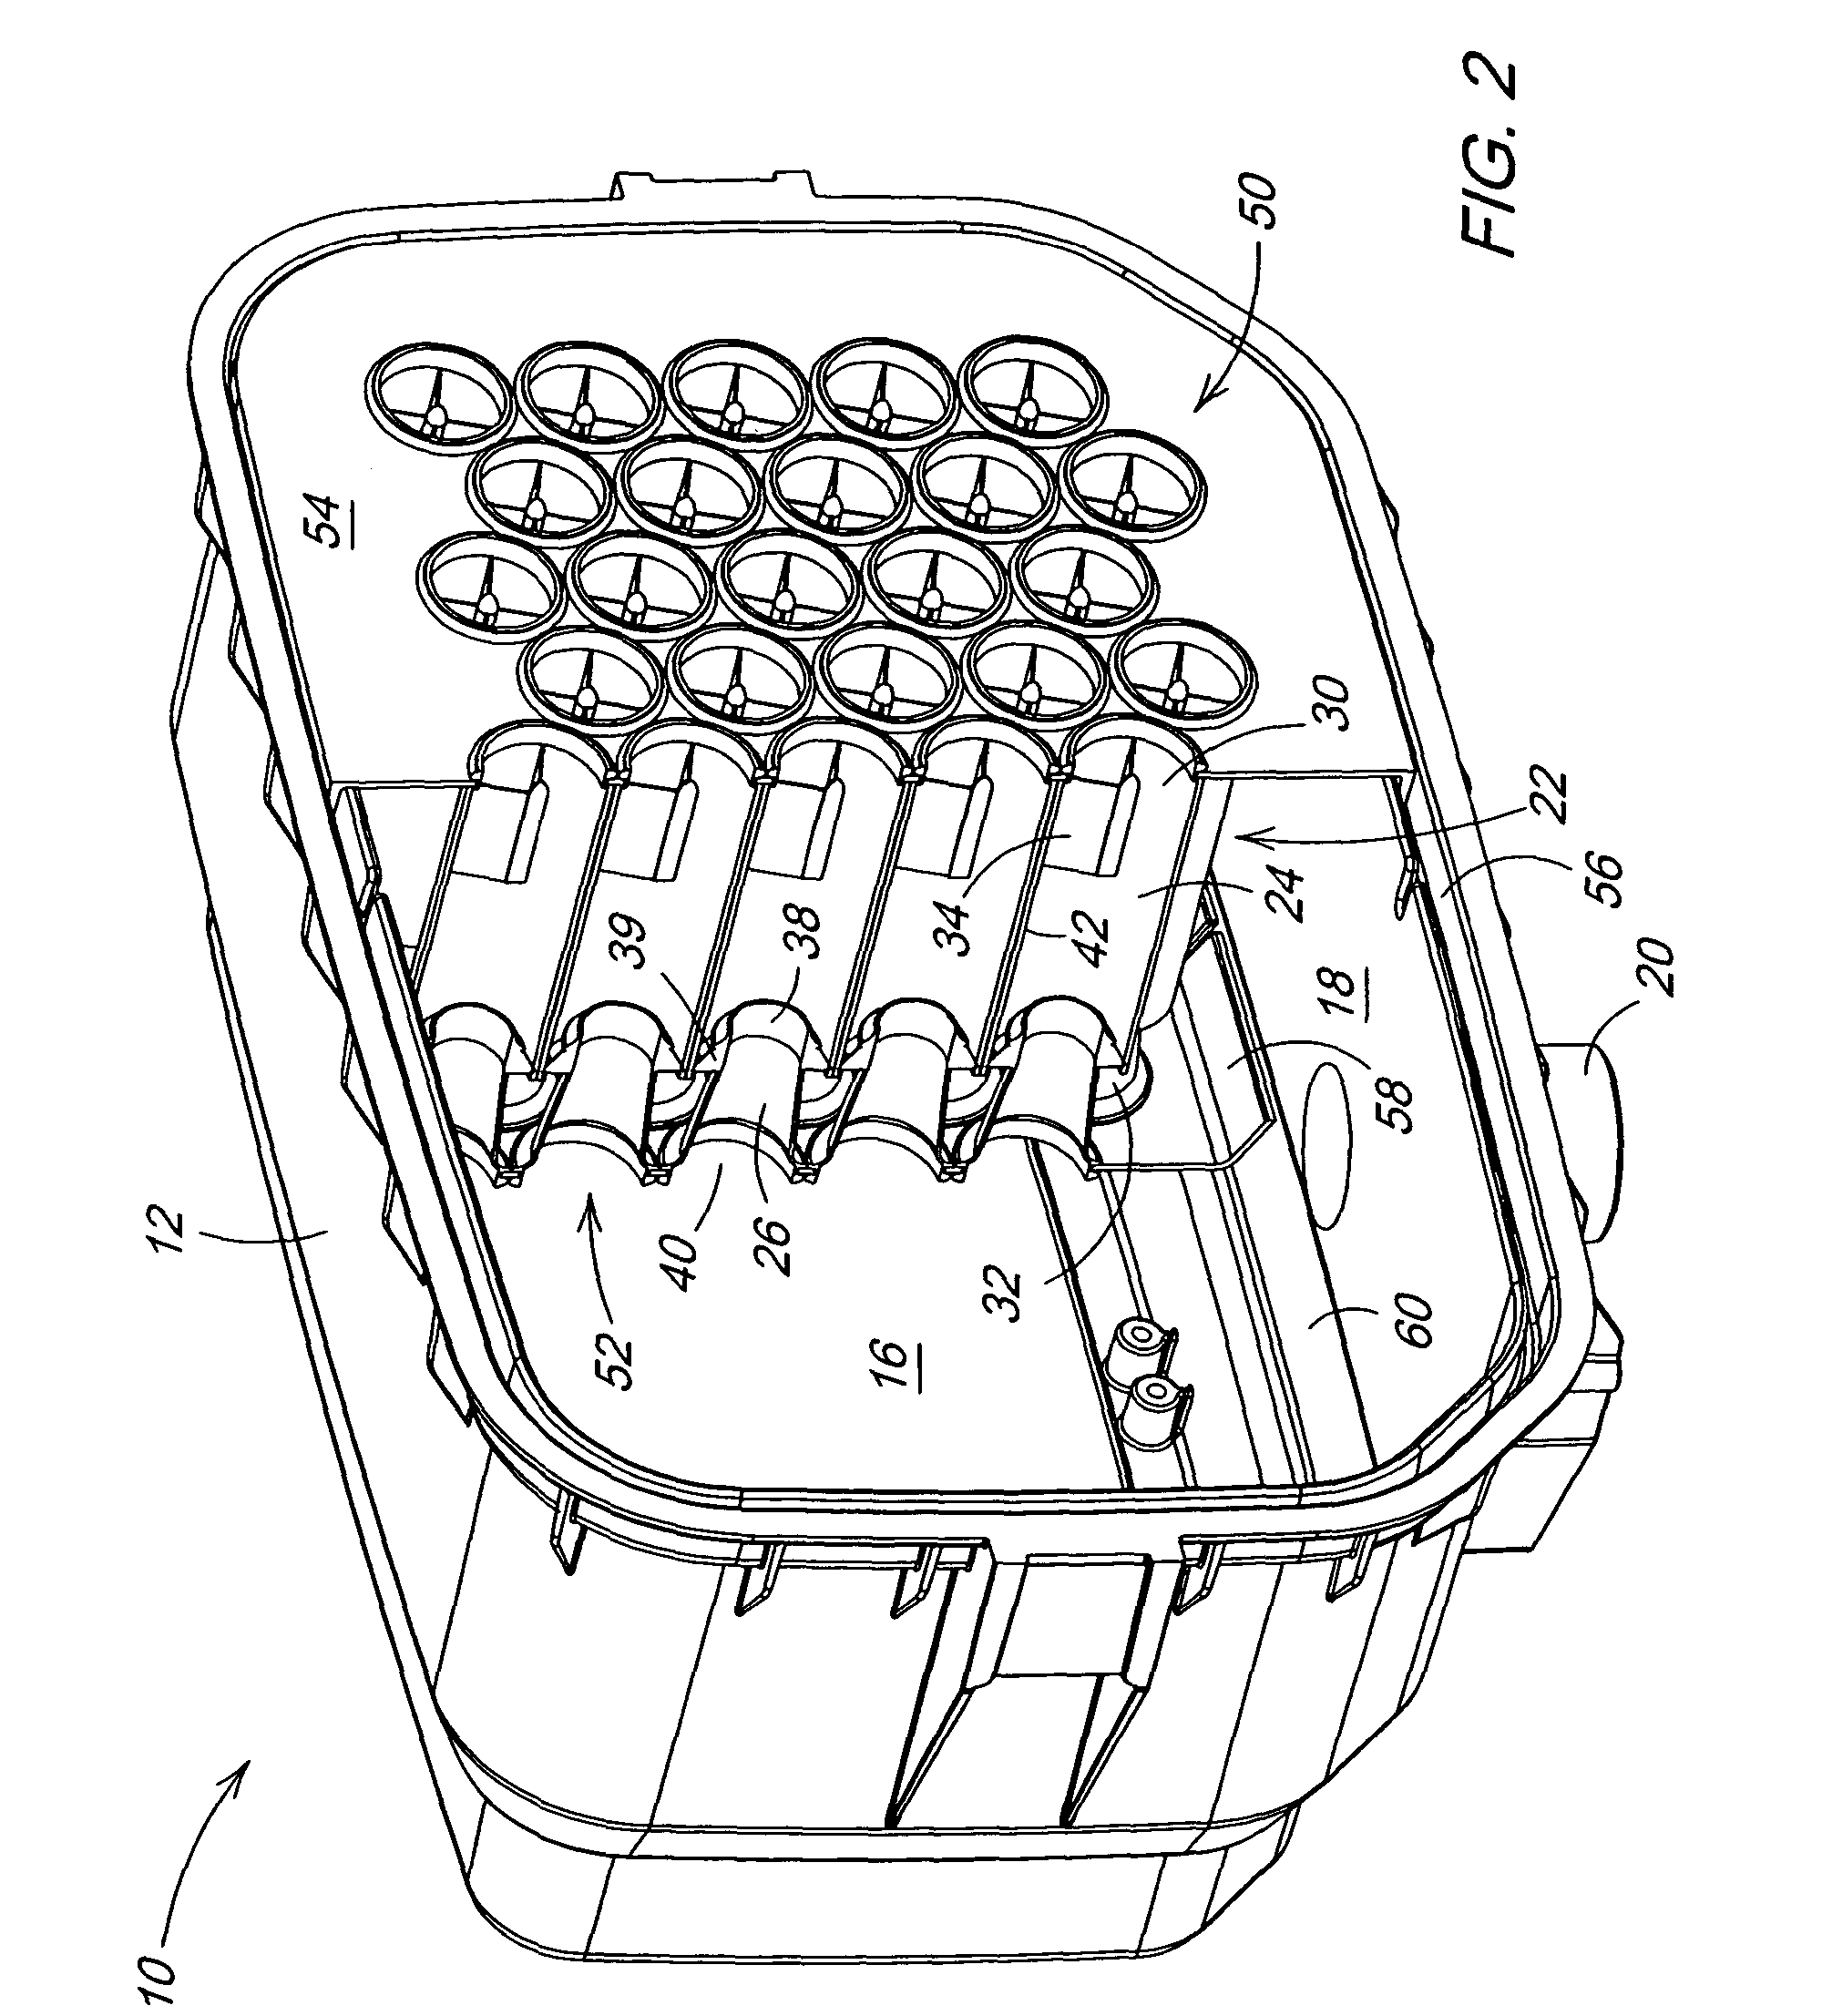 Serviceable vortex-type filter assembly and method for servicing same